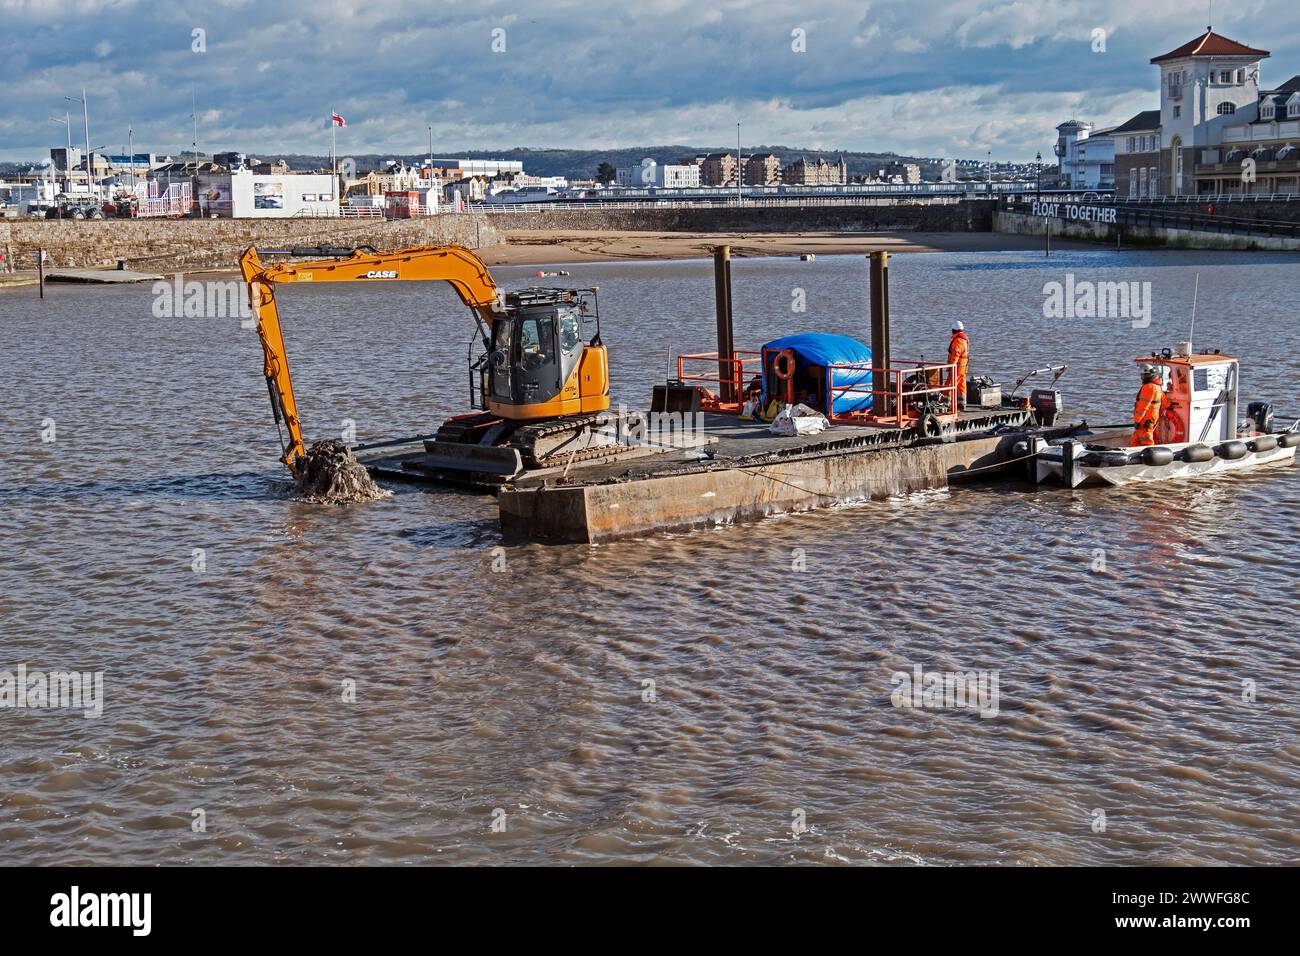 Dredging to remove excess mud from the Marine Lake in Weston-super-Mare, UK on 26 February 2024. Weston-super-Mare is situated on the Bristol Channel, which has one of the highest tidal ranges in the world, and regular dredging is required to ensure that the Marine Lake remains usable for swimming. Stock Photo